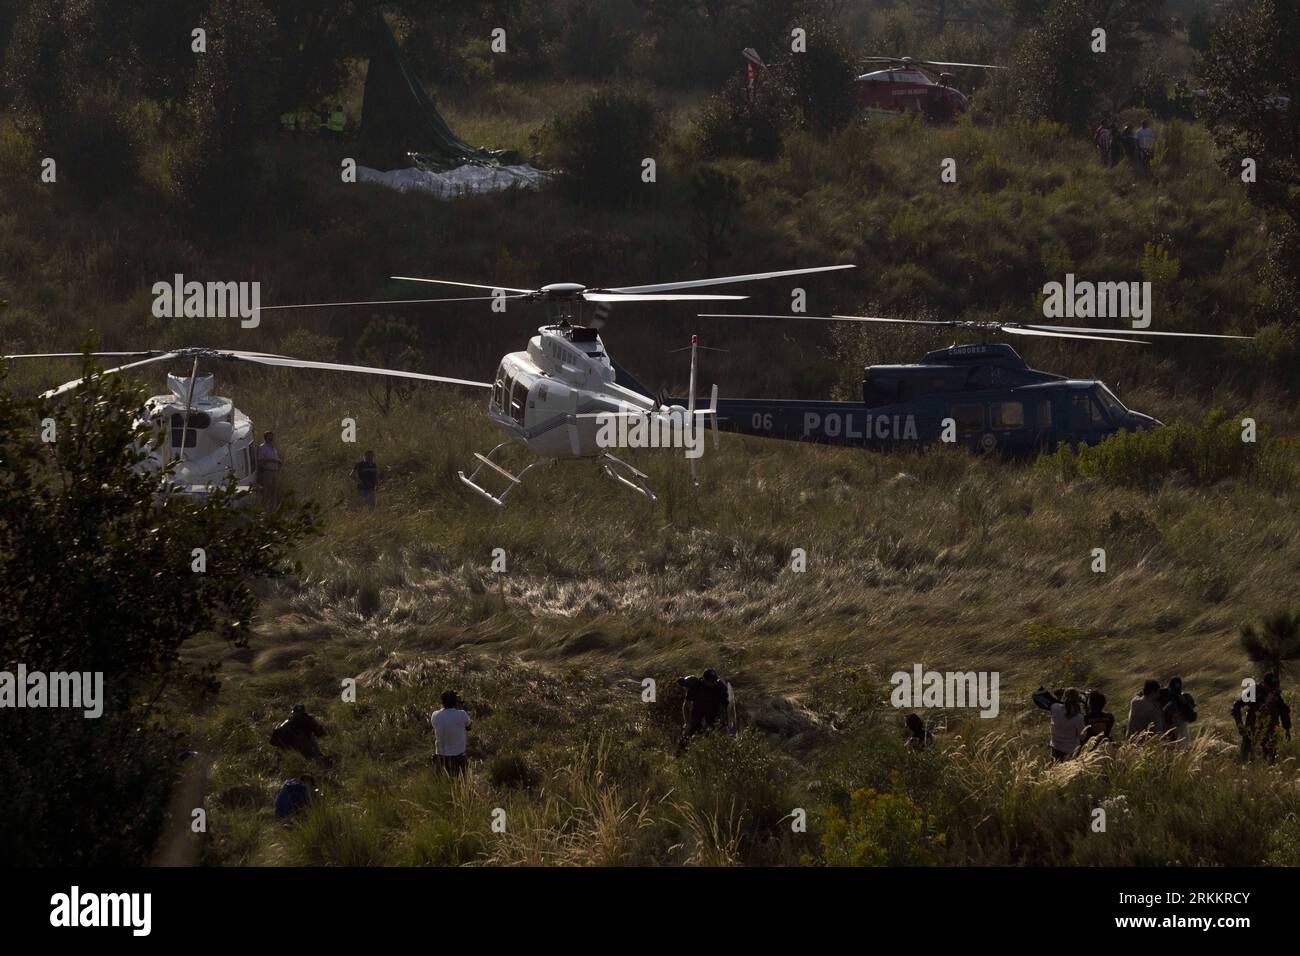 Bildnummer: 56273074  Datum: 11.11.2011  Copyright: imago/Xinhua (111112) -- CHALCO, Nov. 12, 2011 (Xinhua) -- Police helicopters land at the site where the helicopter carriying Mexican Interior Minister Francisco Blake Mora crashed, in the municipality of Chalco, State of Mexico, Mexico, on Nov. 11, 2011. Mexican Interior Minister Francisco Blake Mora and Vice Interior Minister Felipe Zamora were killed in a helicopter crash on Friday, official sources said. (Xinhua/Claudio Cuz) (zf) MEXICO-INTERIOR MINISTER-FRANCISCO BLAKE MORA-DEATH PUBLICATIONxNOTxINxCHN People Politik Absturz Hubschrauber Stock Photo